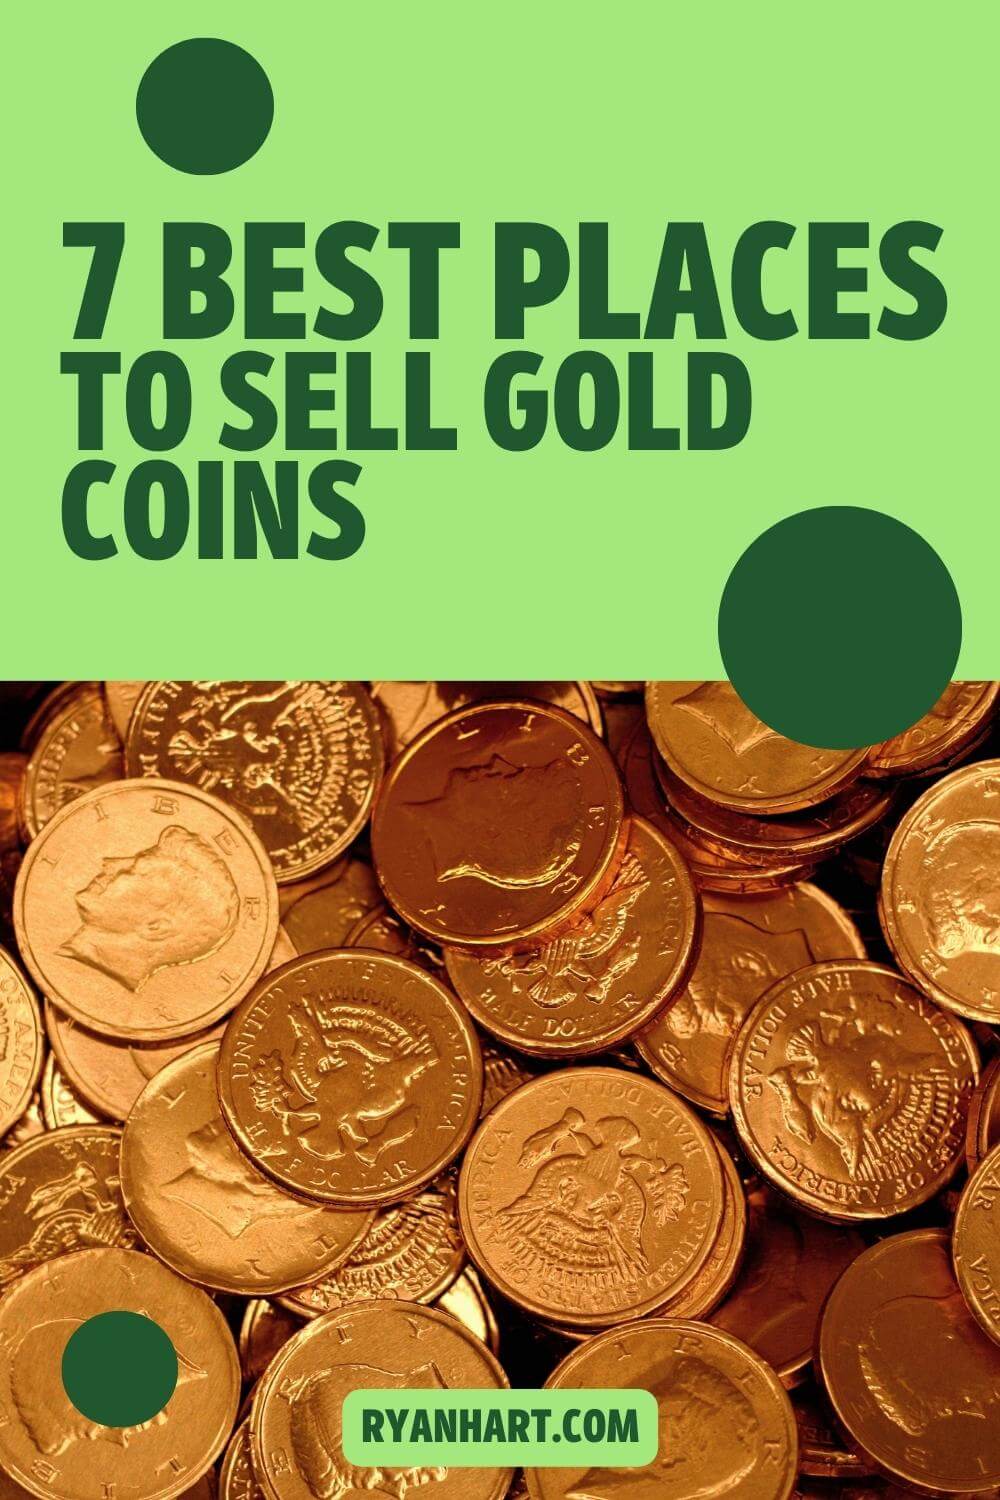 Gold Center - We Buy Gold Coins For Cash & For The Best Price In Israel!